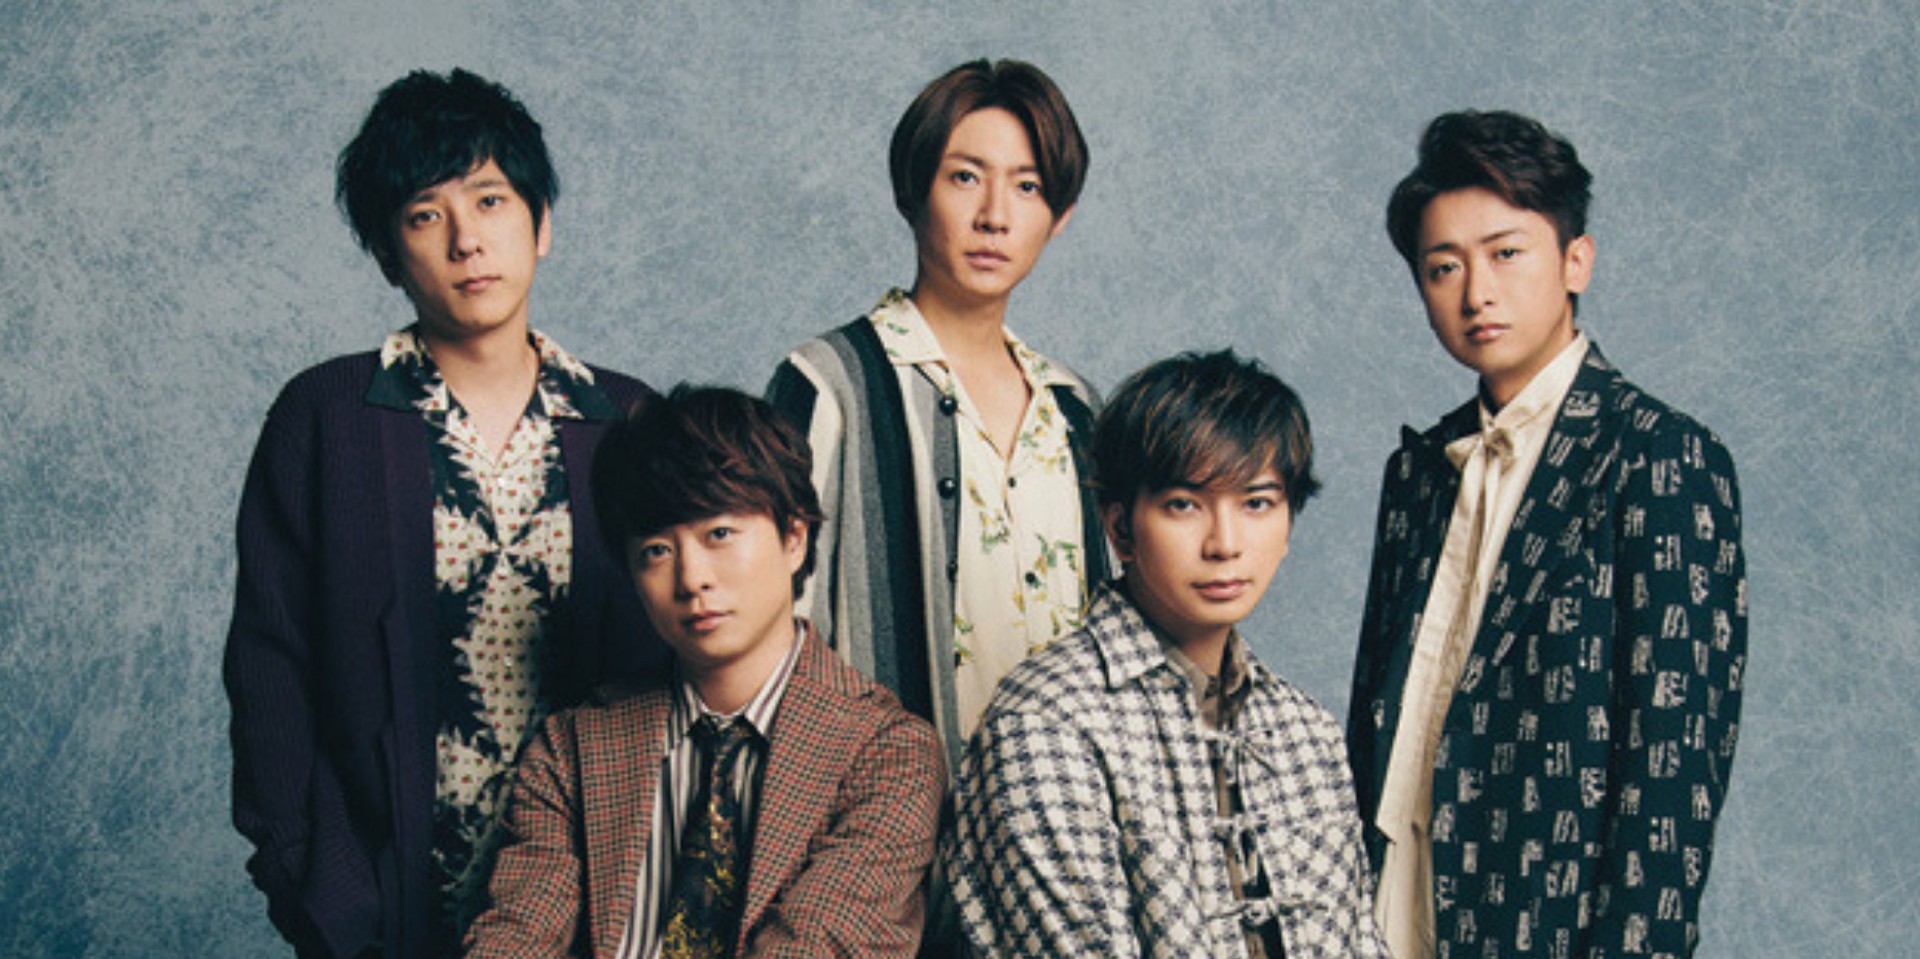 ARASHI's 'ANNIVERSARY TOUR 5x20 FILM “RECORD OF MEMORIES”' is coming to Singapore, Malaysia, and Indonesia